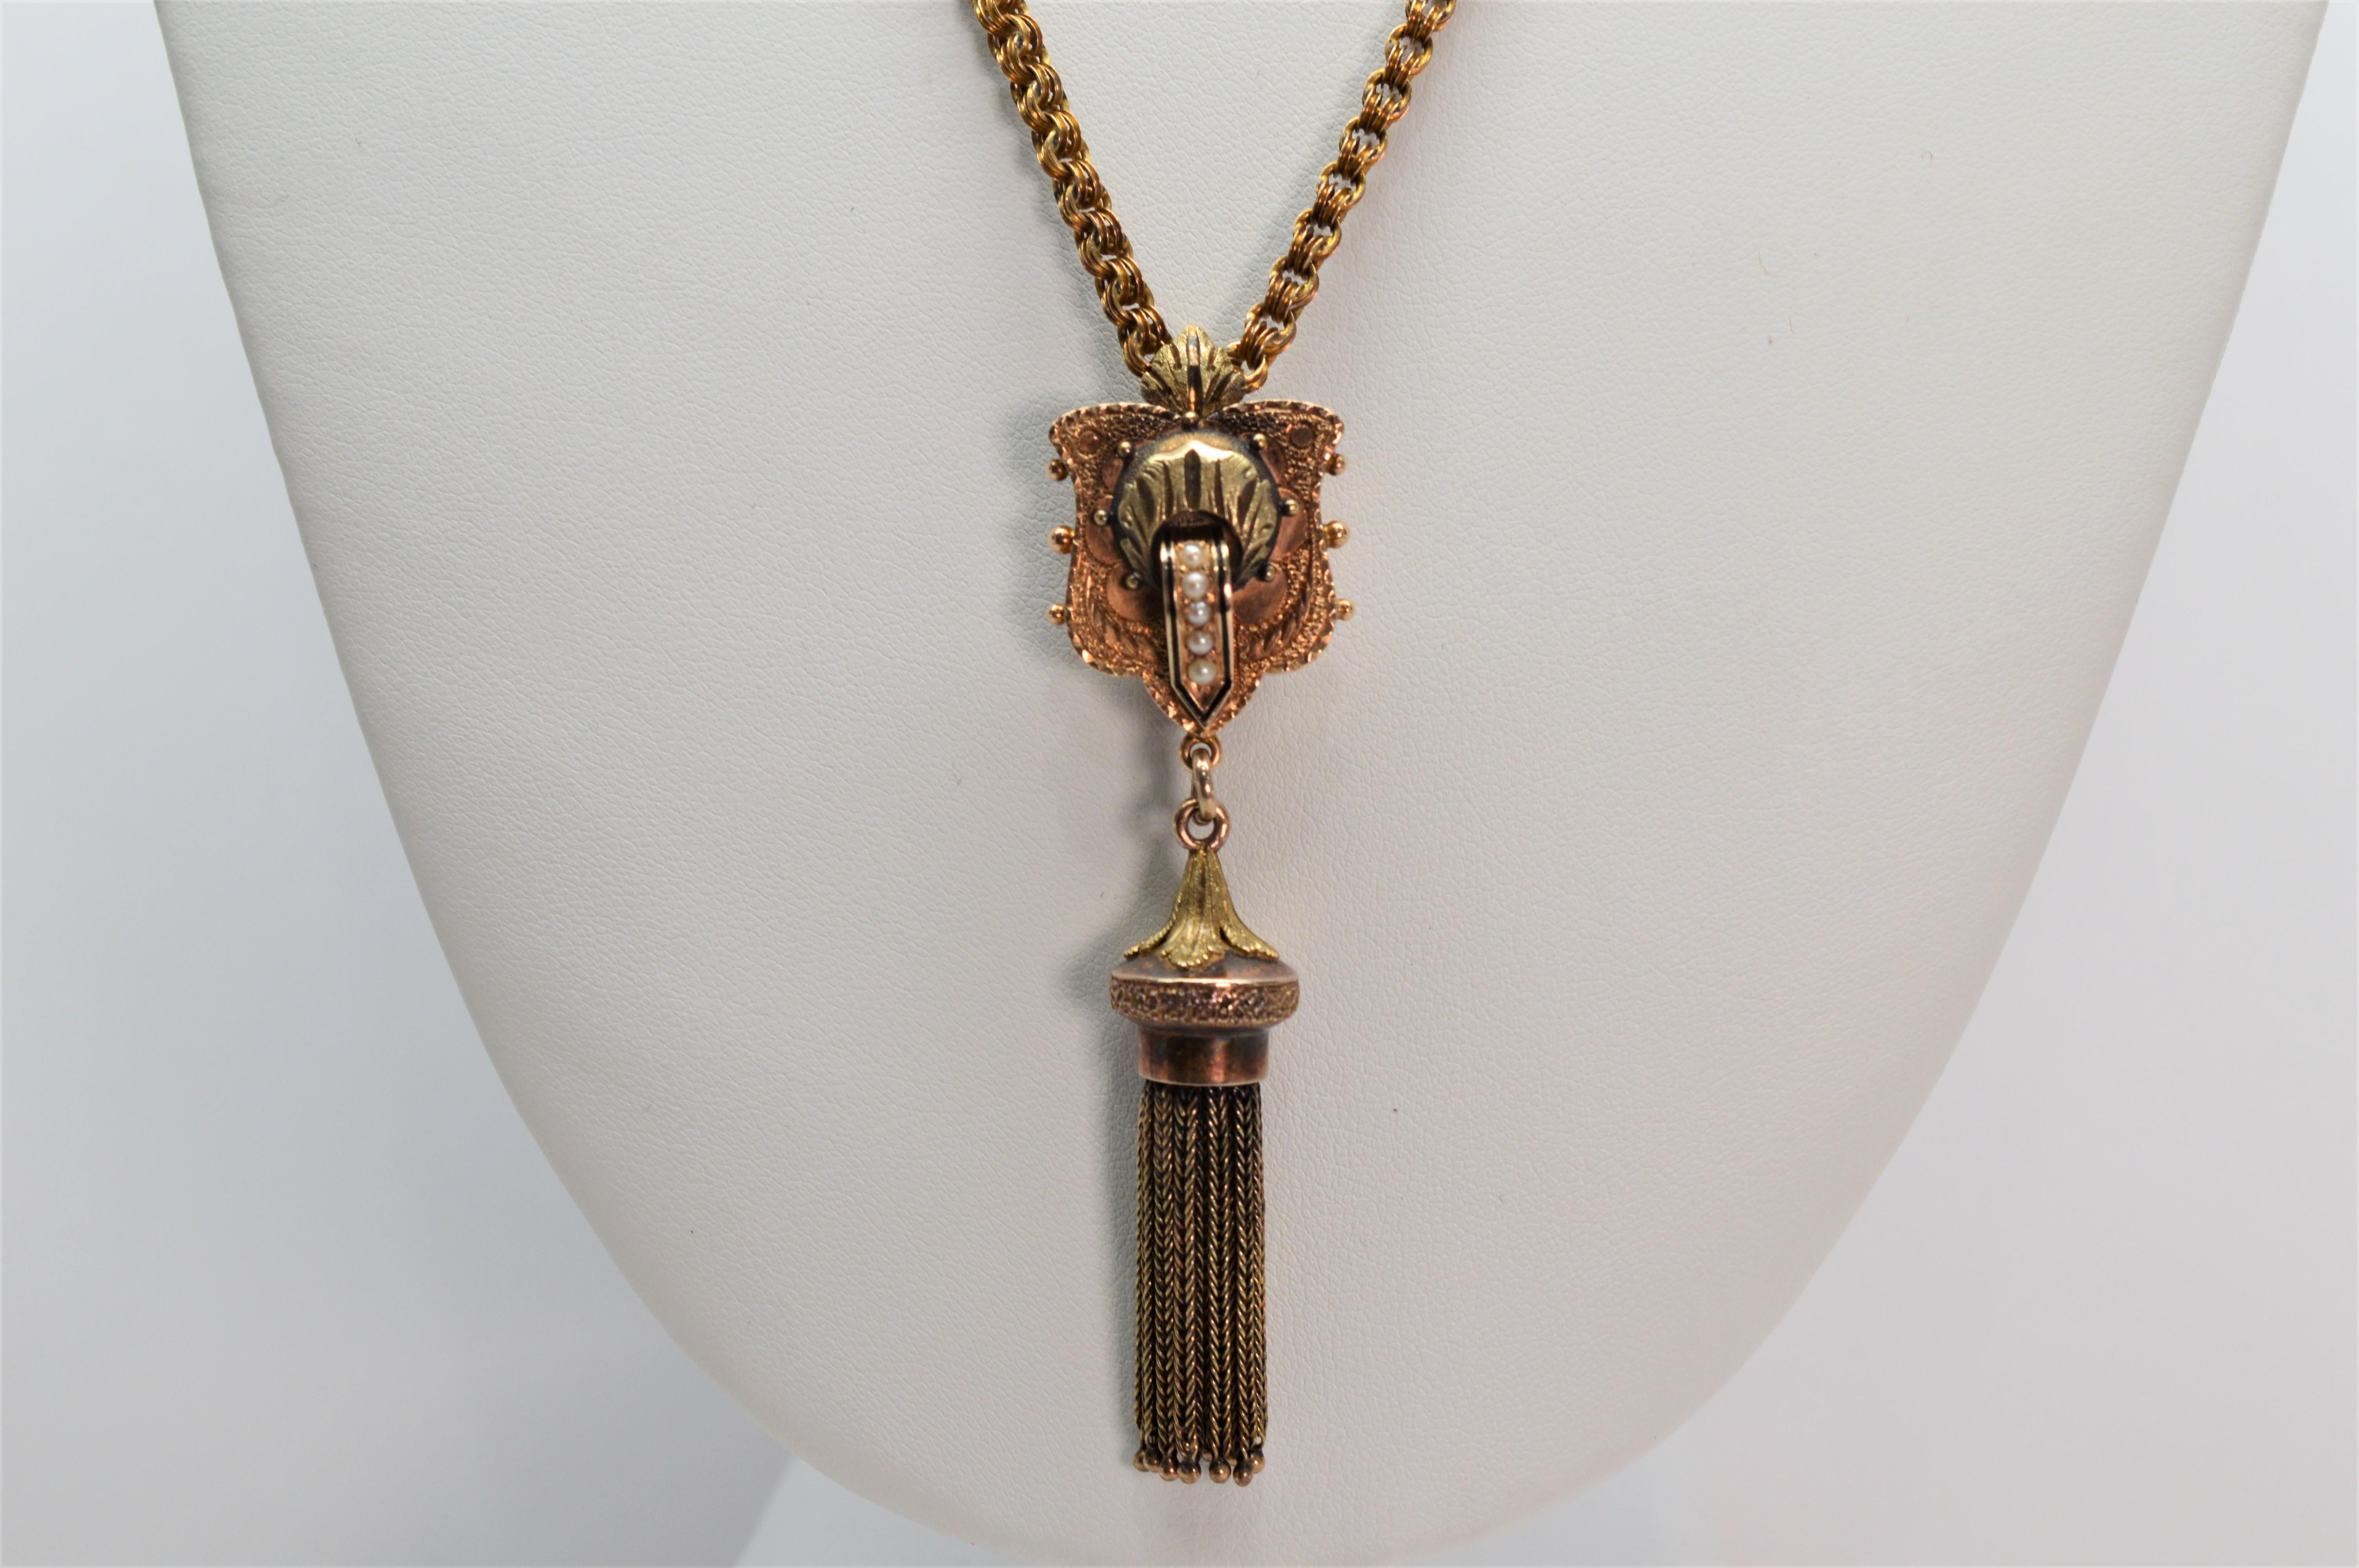 Antique and unique, this elegant pendant with dangling tassels presents an artisan quality and the design of opulence from an era gone by. This regal pendant adorned with tiny pearls, measures
 3 inches in length from top of pendant shield to bottom